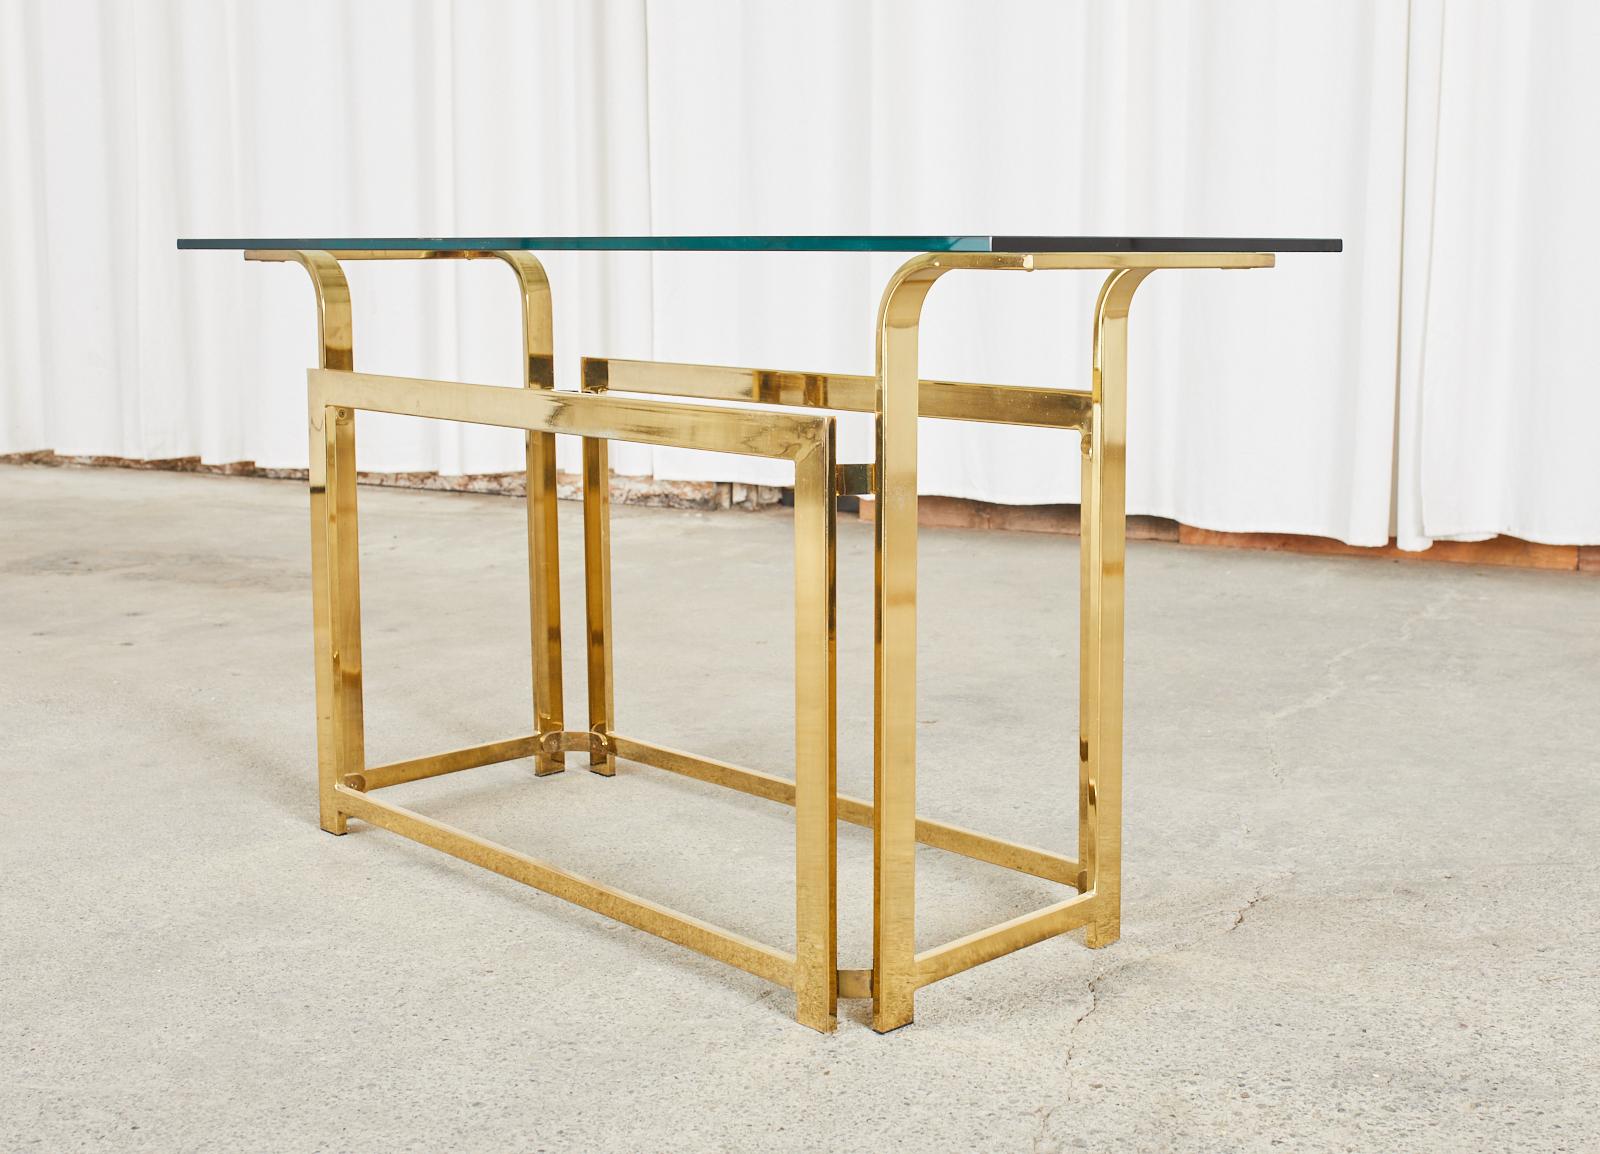 Mid-Century Modern console table or sofa table crafted from flat bar metal with a brass or gilded tone in the manner and style of Milo Baughman. The console features a rectangular frame with conjoined sides. The ends are gracefully curved upward